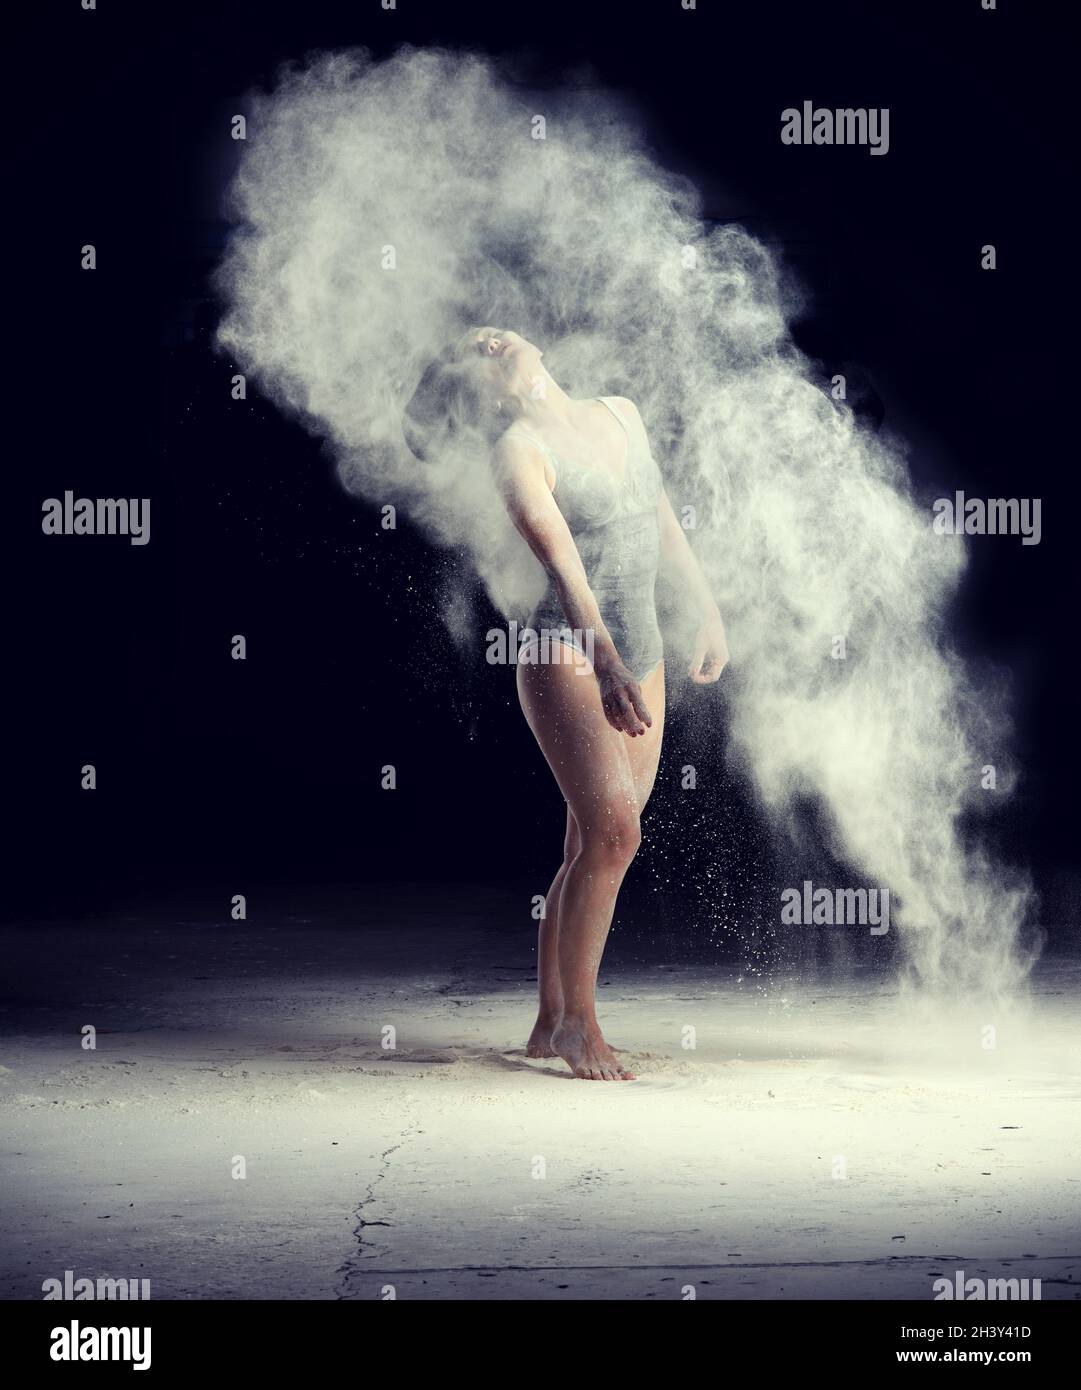 Beautiful caucasian woman in a black bodysuit with a sports figure is dancing in a white cloud of flour on a black background Stock Photo